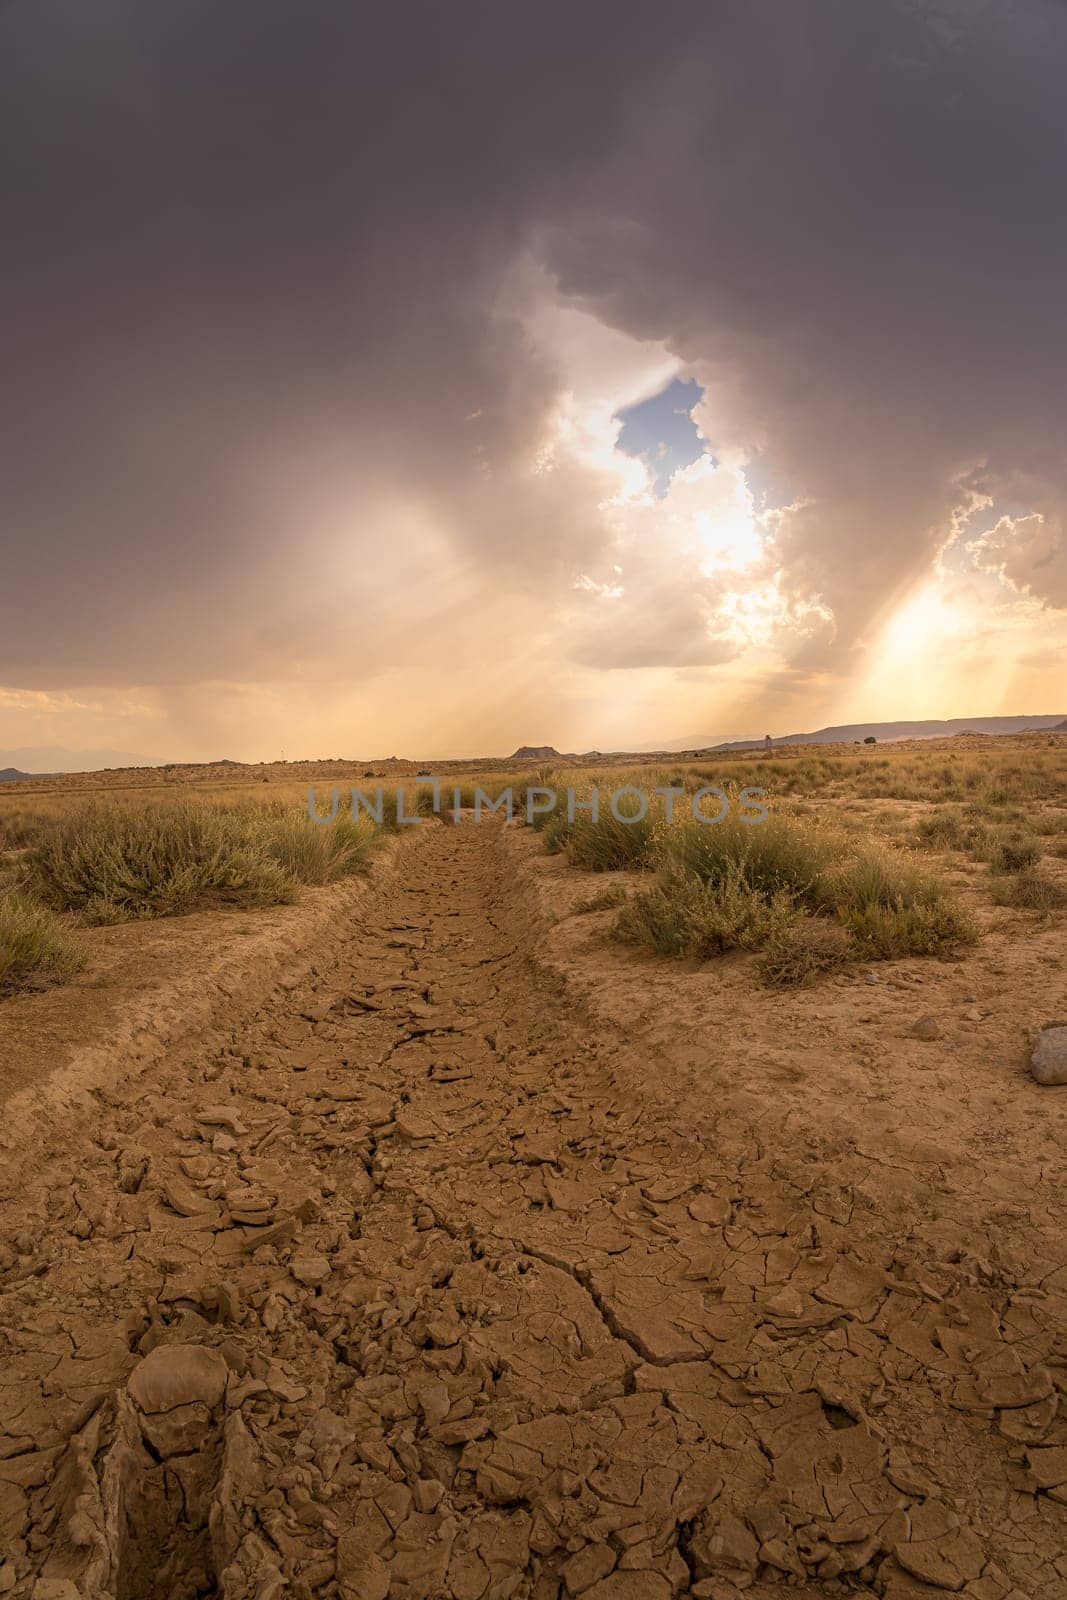 View of Bardenas Reales in Spain with stormy sky and dry ground. by maramade